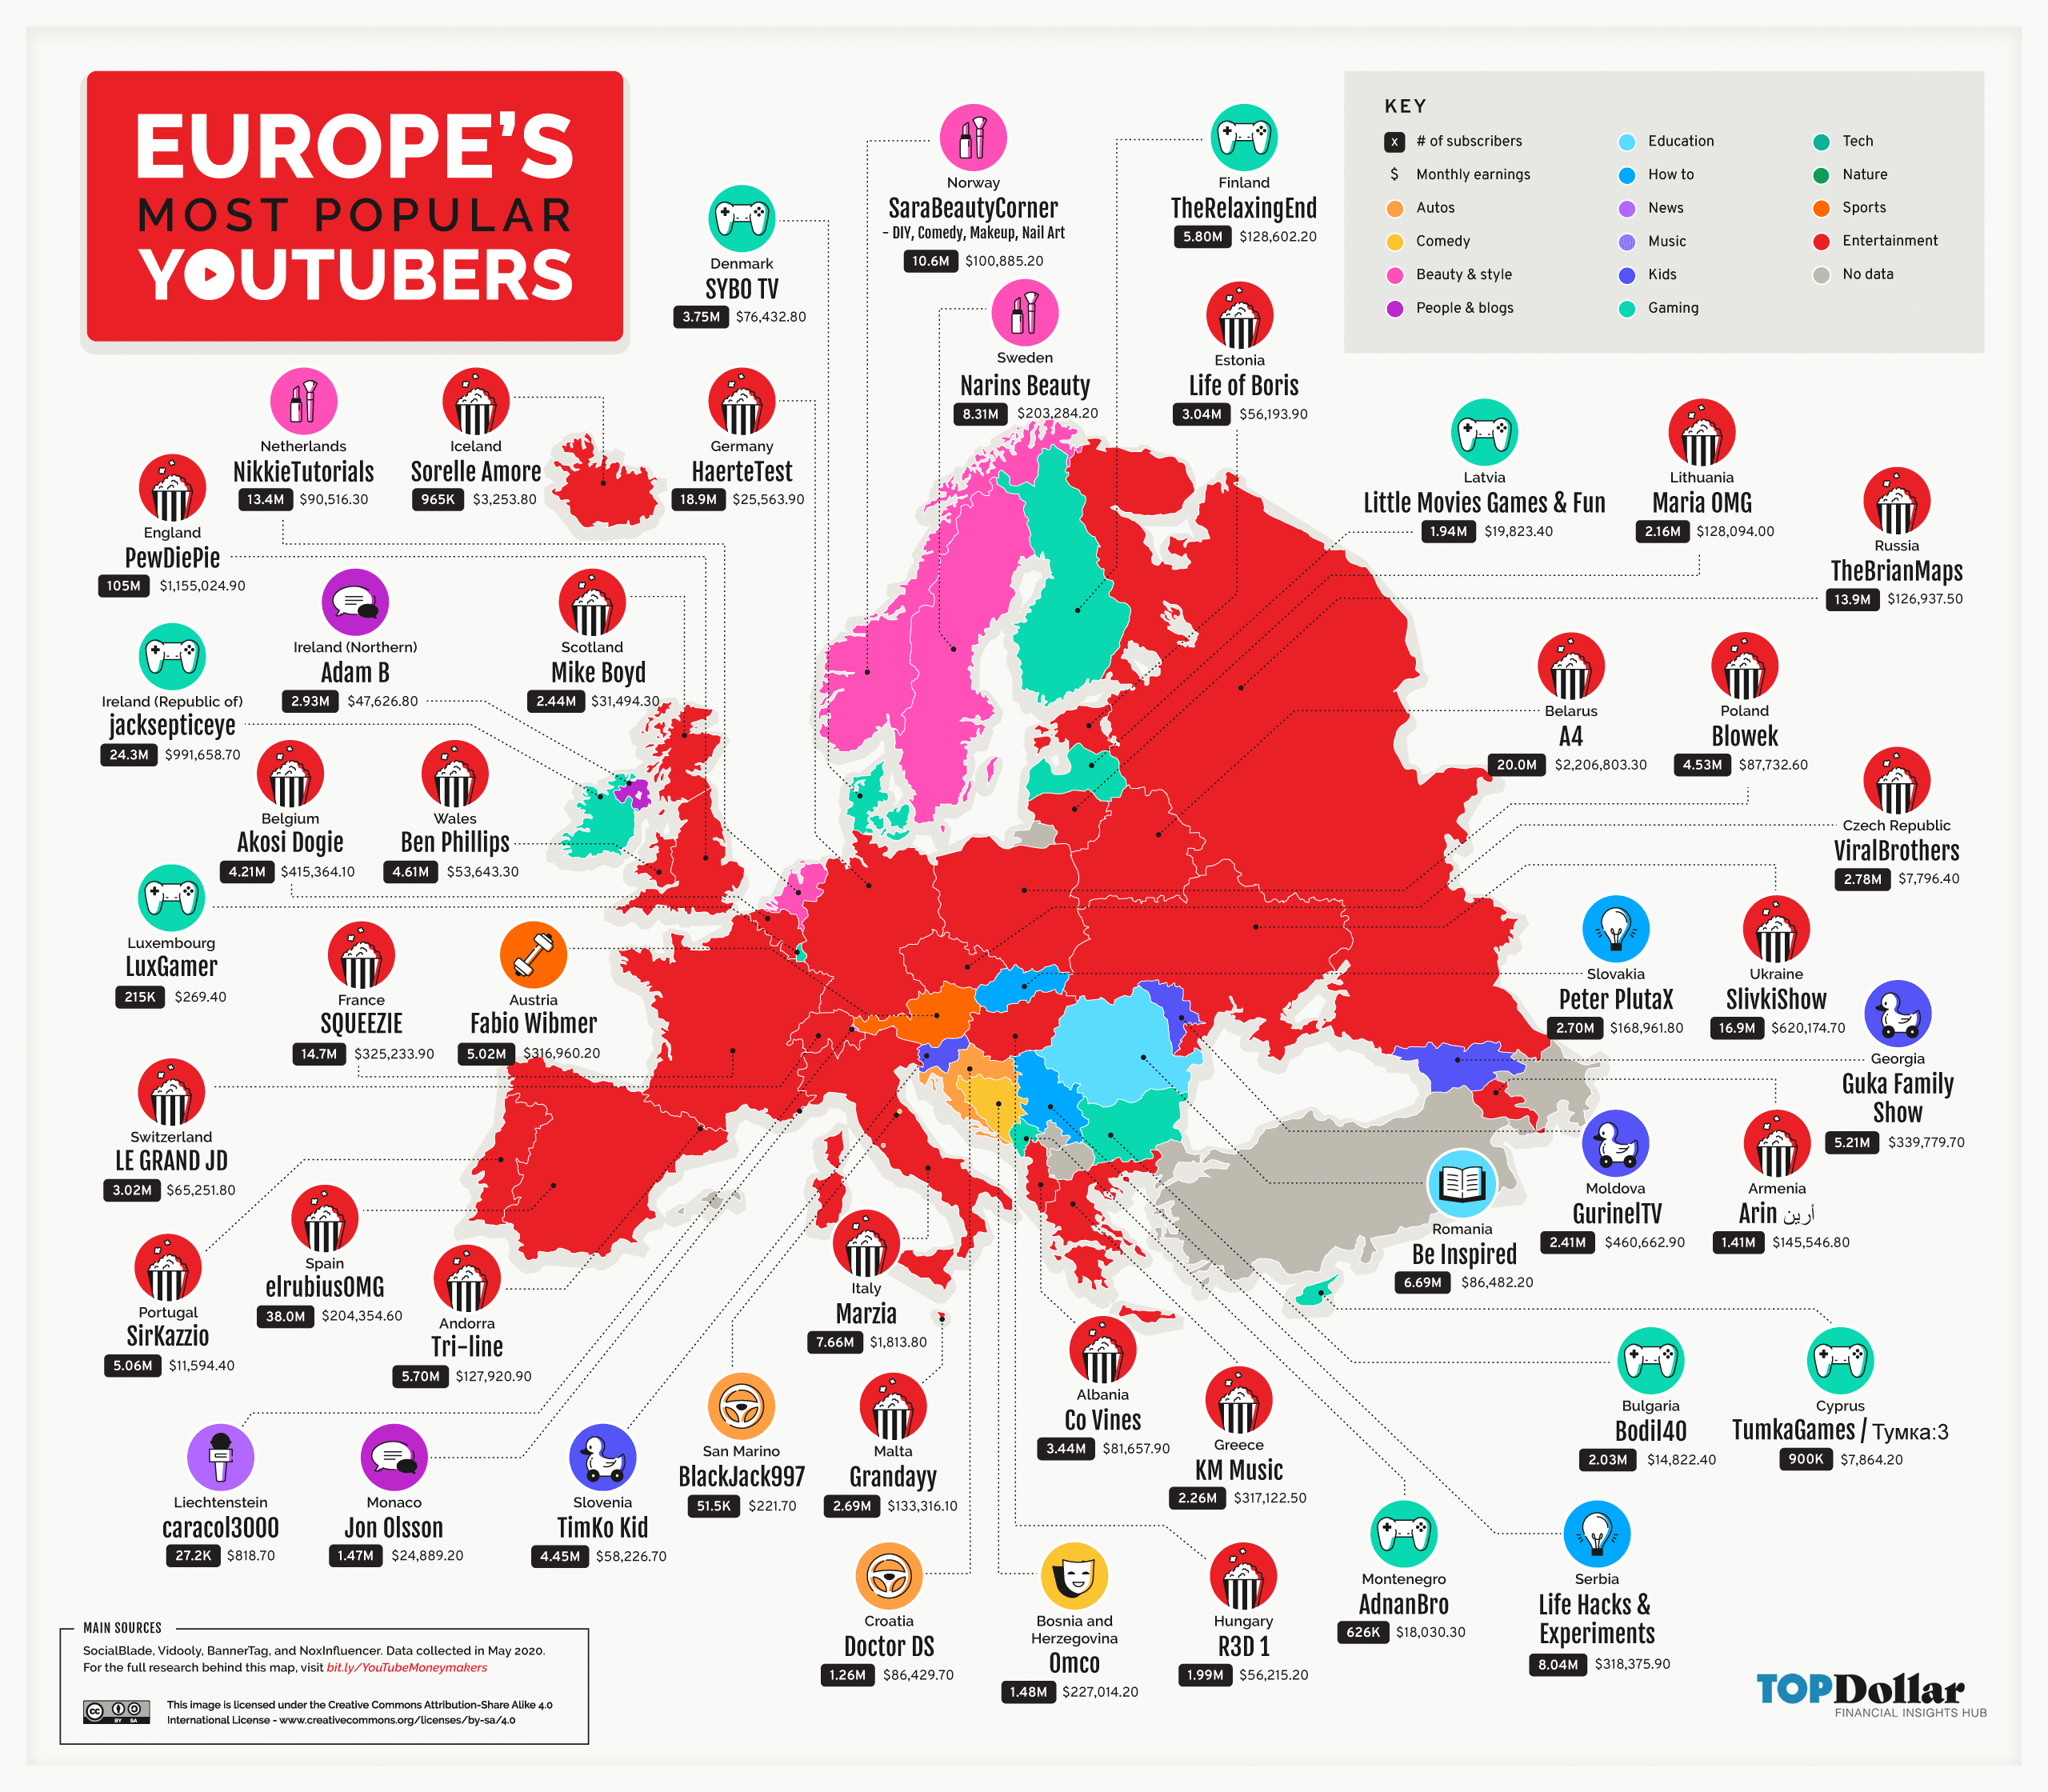 Europe's Most Popular YouTubers